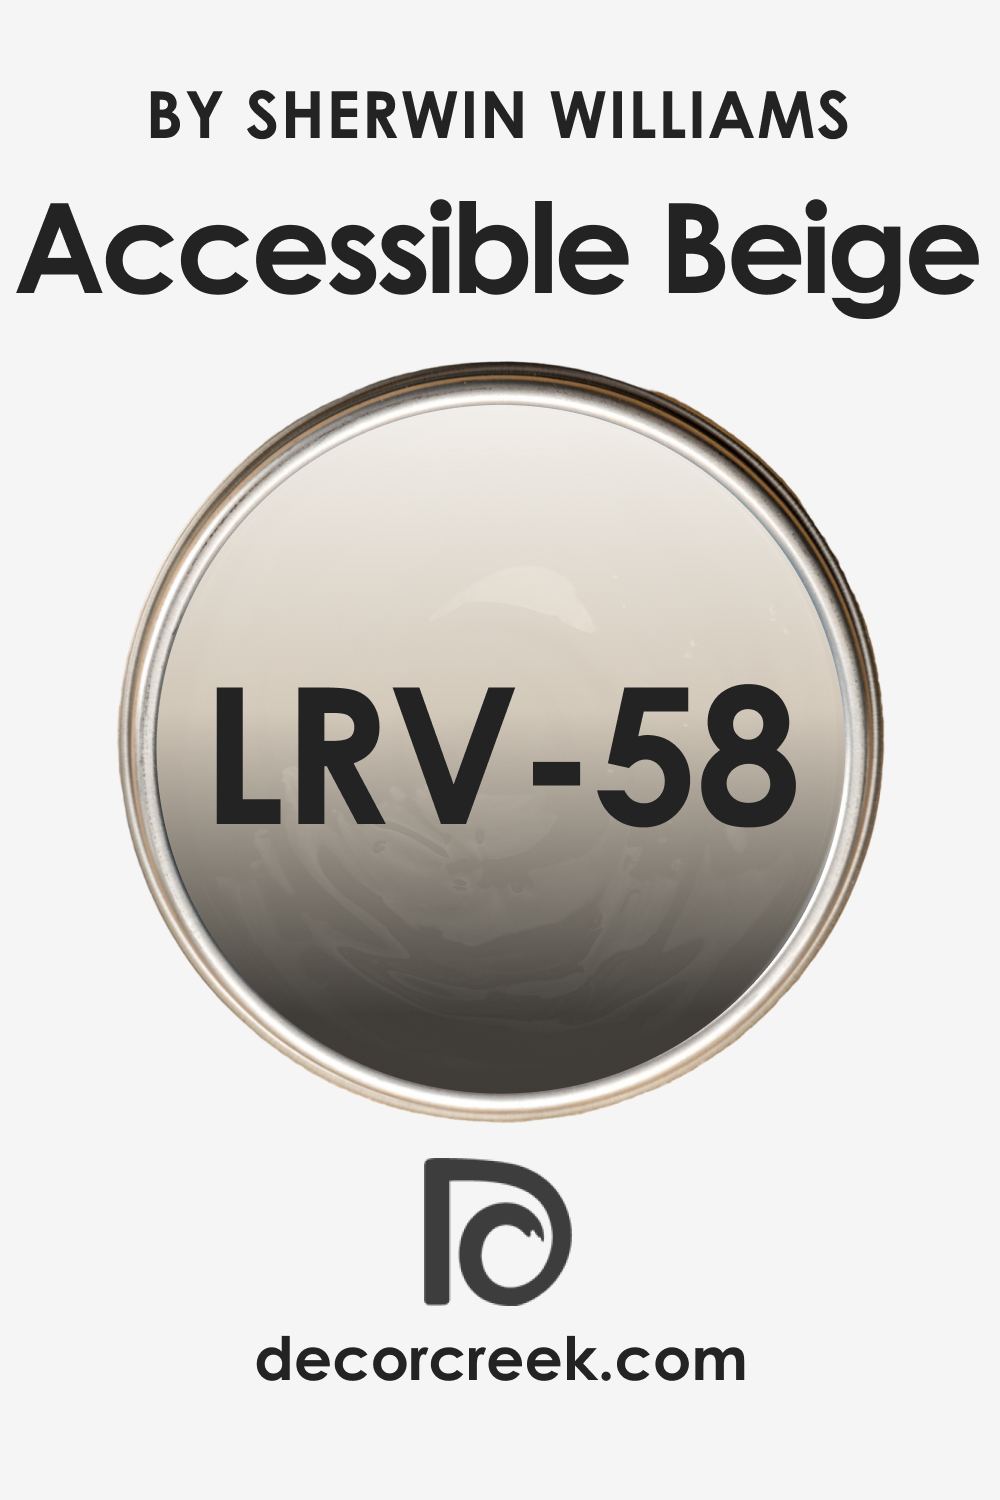 LRV of Accessible Beige SW 7036